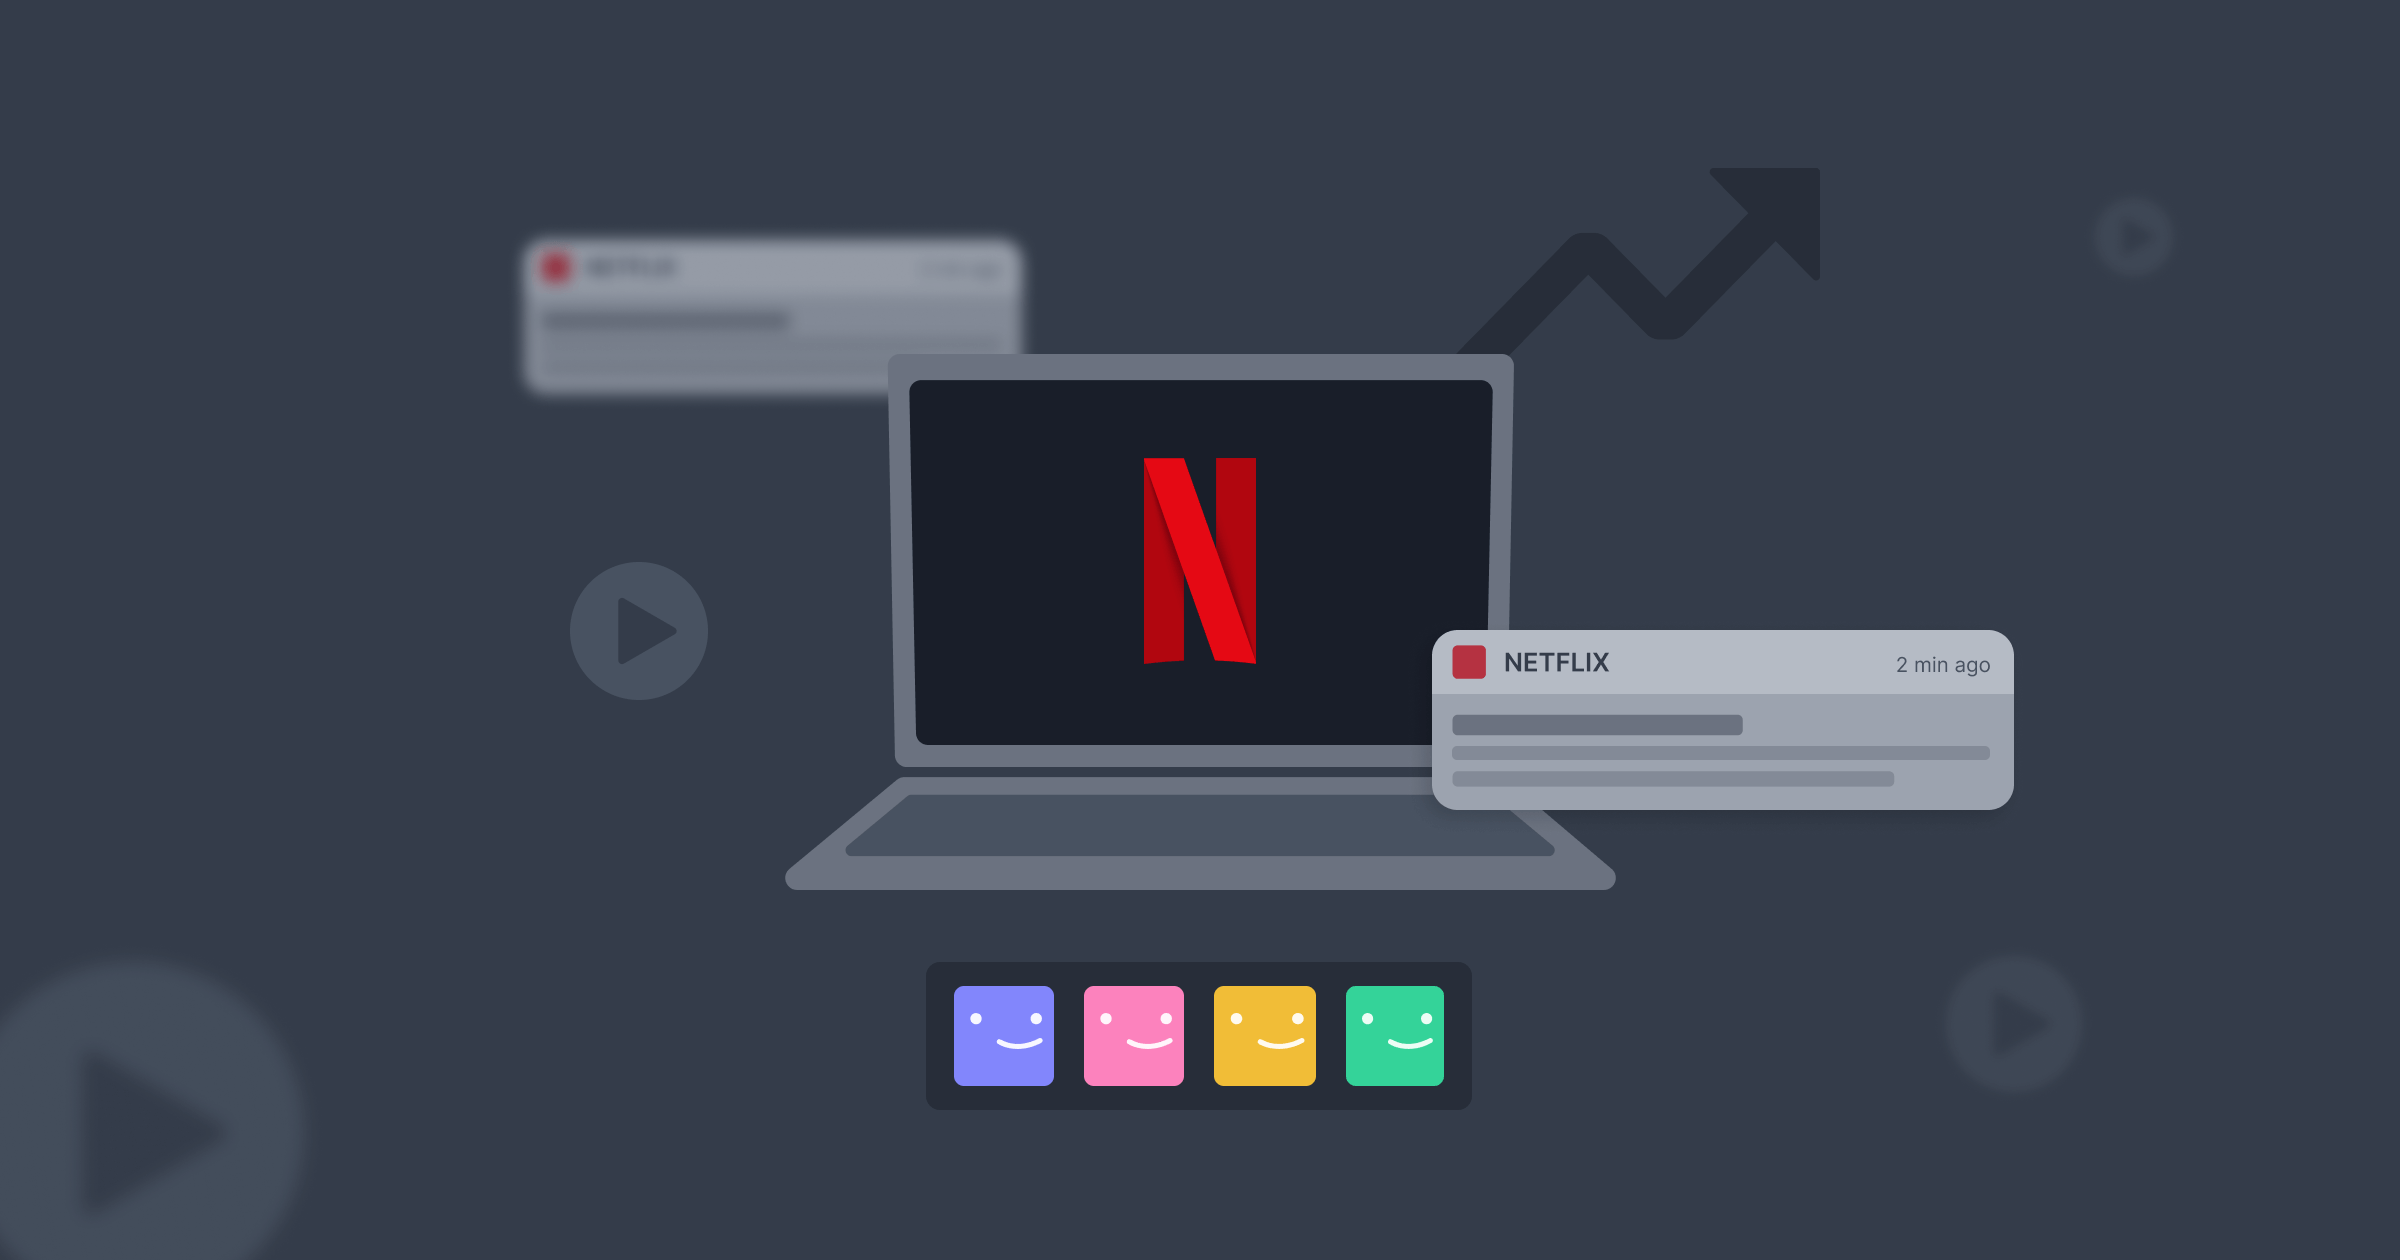 A notebook connecting to Netflix surrounded by an arrow indicating the increase in CRO and a push notification, one of the company's CRO triggers.